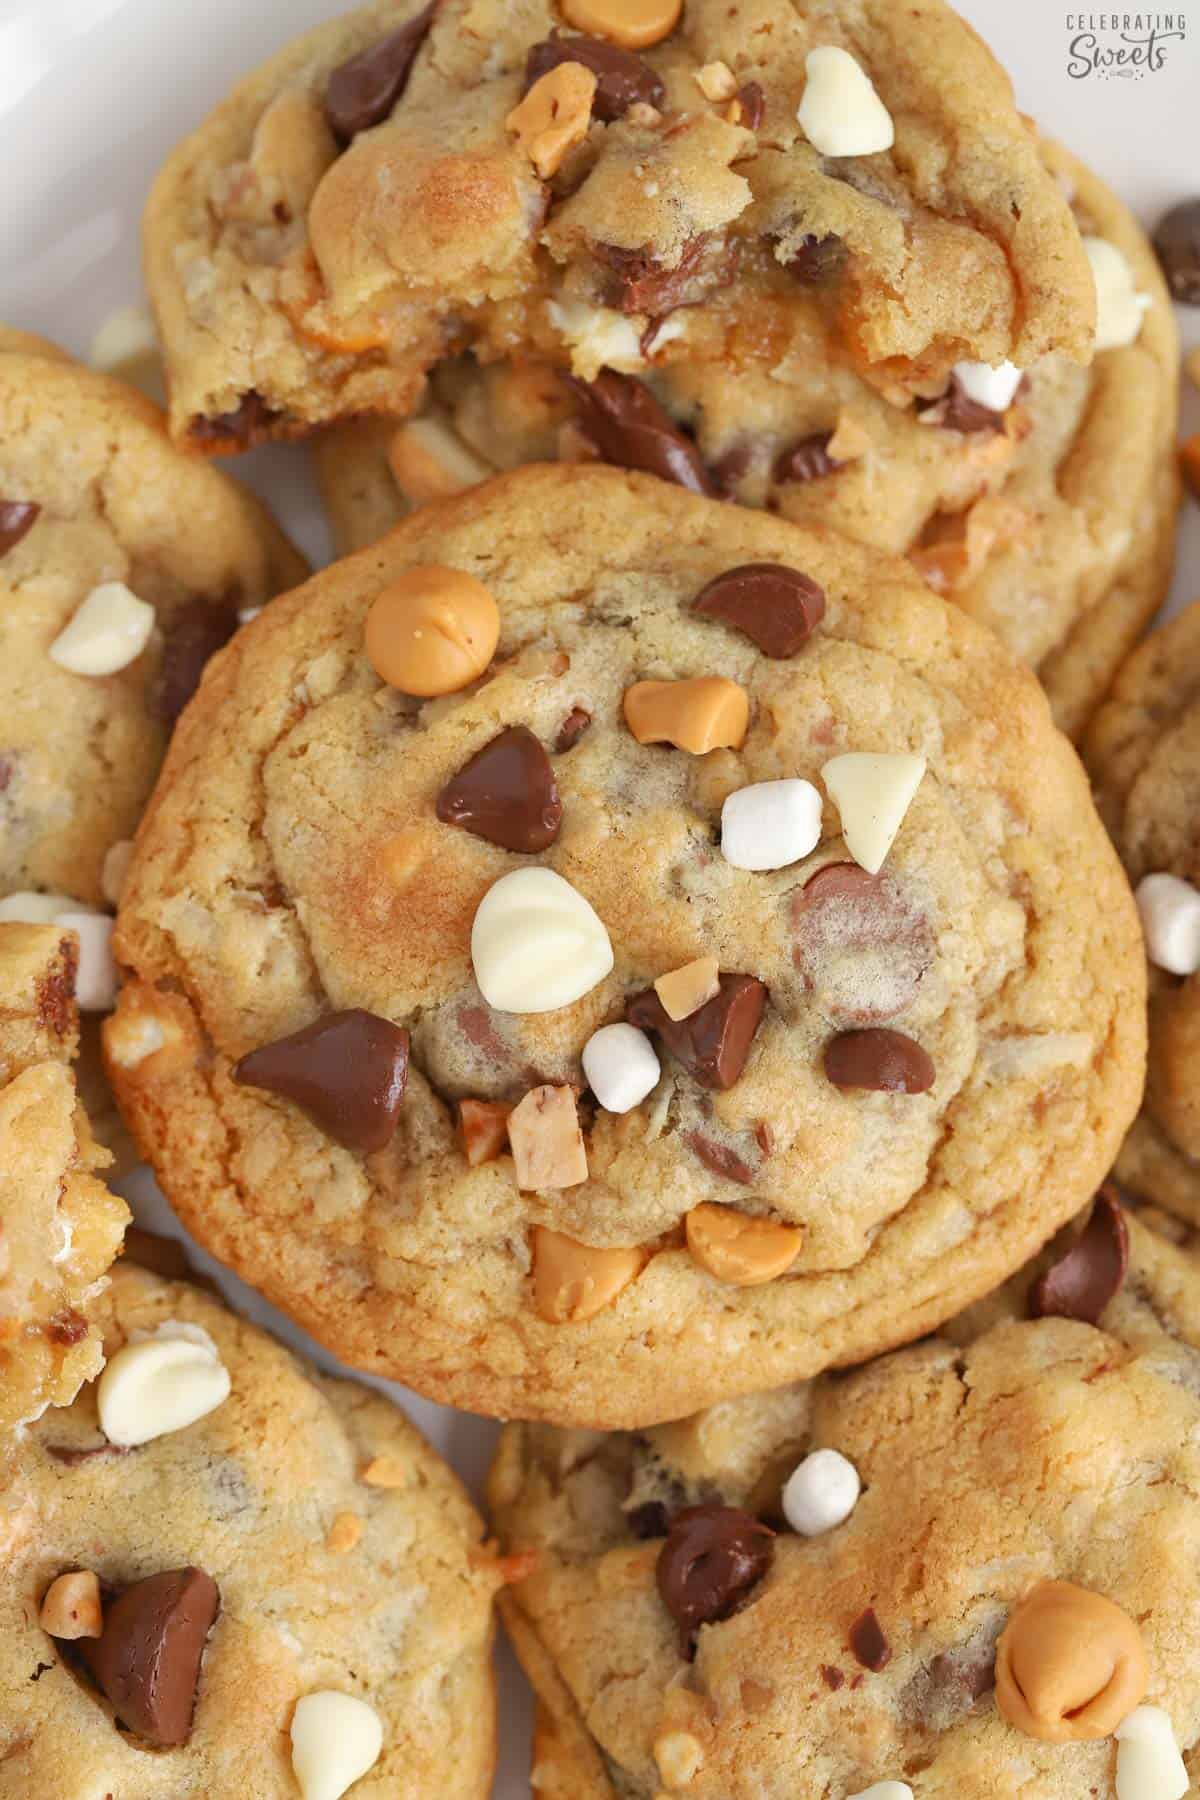 Cookies topped with white chocolate, butterscotch, and chocolate chips.